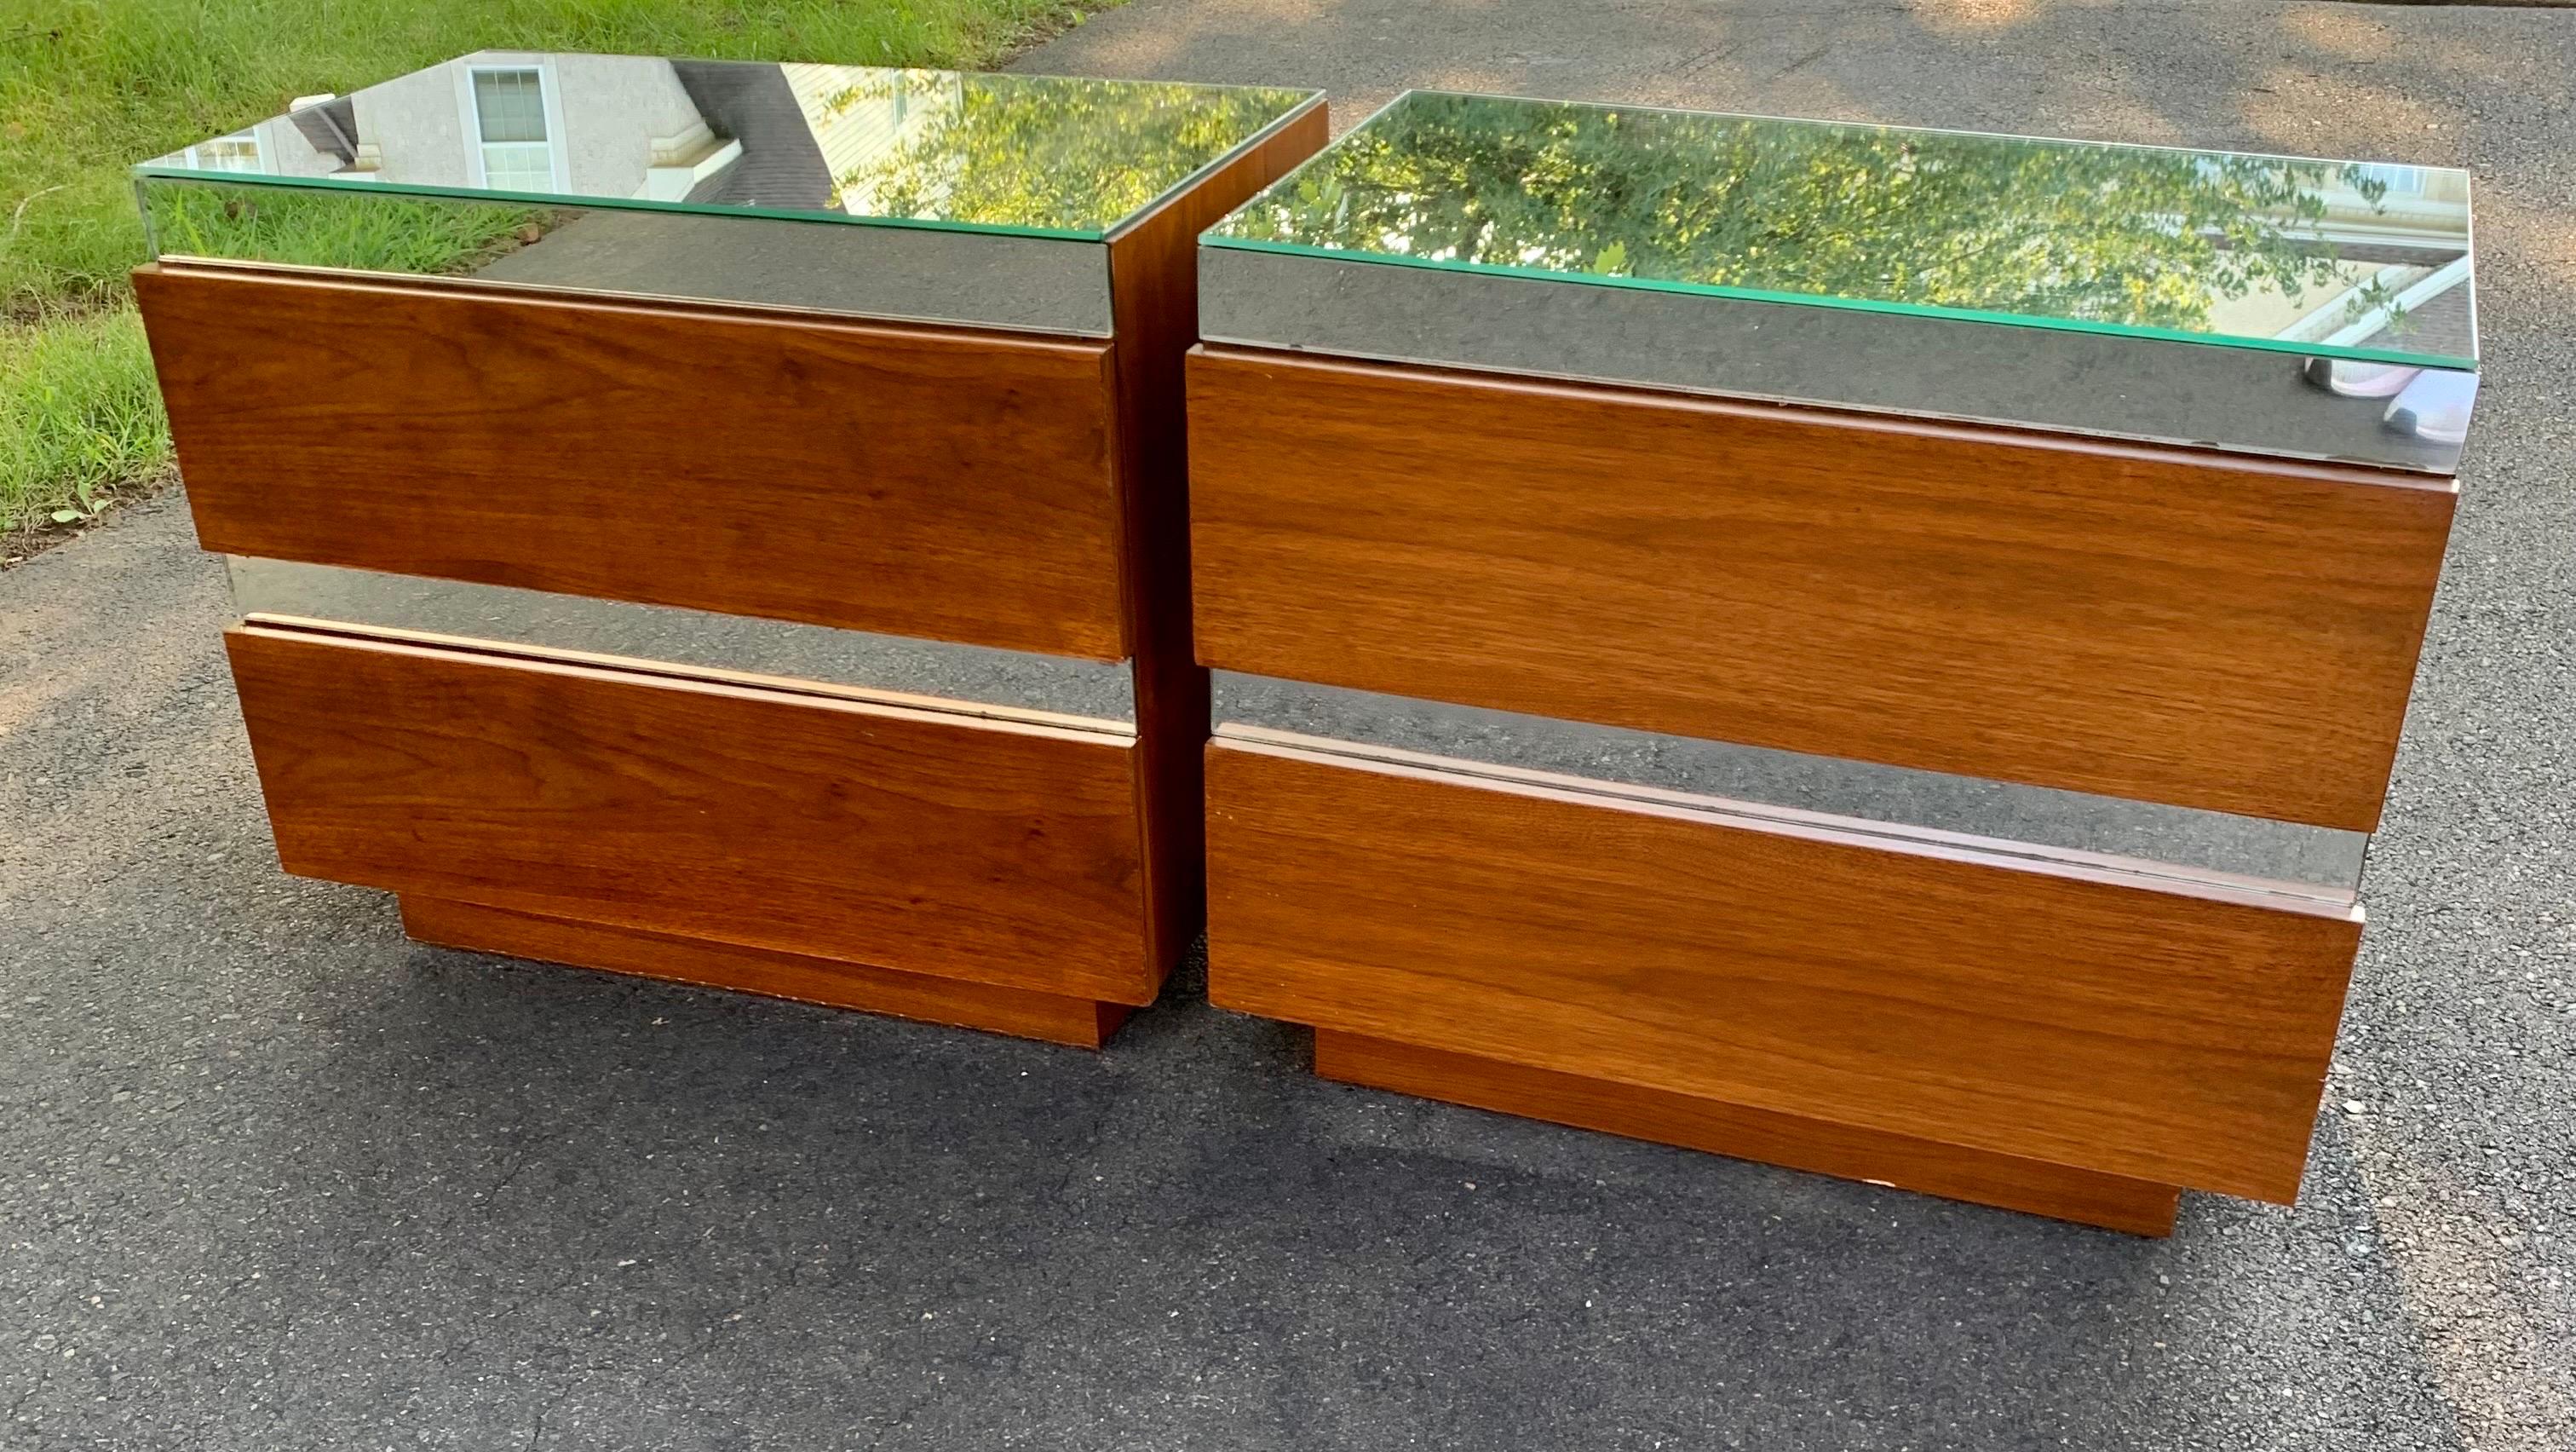 Unique post modern mirrored top and accented nightstands. Sleek design with two drawers.  Nice vintage condition with beautiful wood grain. Drawers slide smoothly. Super pretty pair.